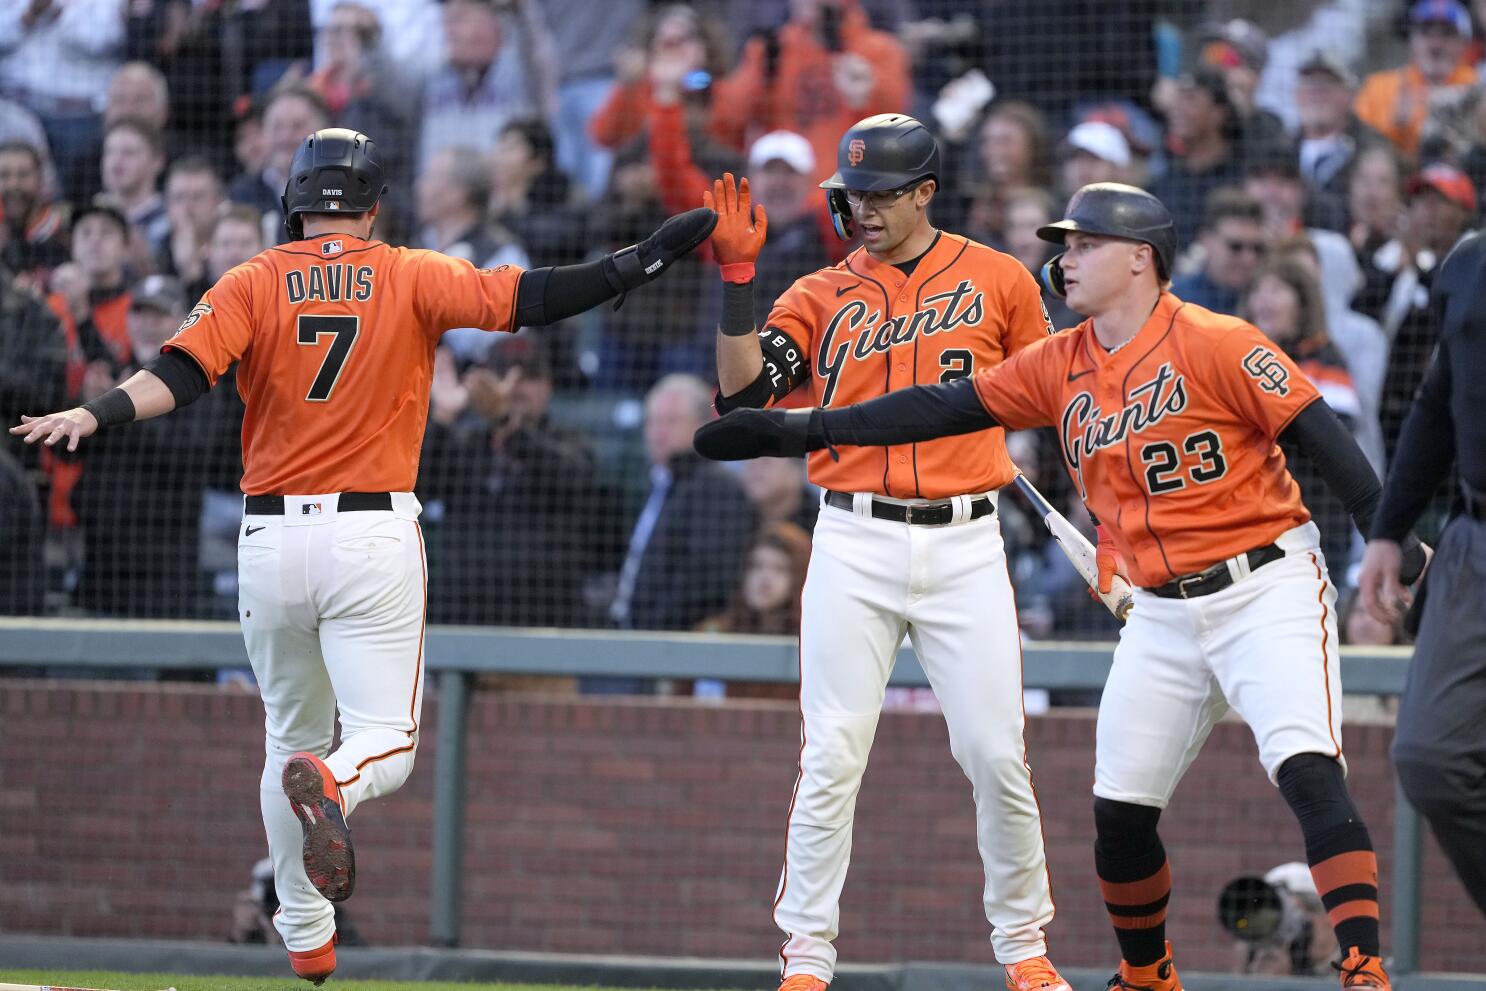 Conforto drives in 4 runs to back Webb in the Giants' 8-5 victory over the  Diamondbacks - The San Diego Union-Tribune